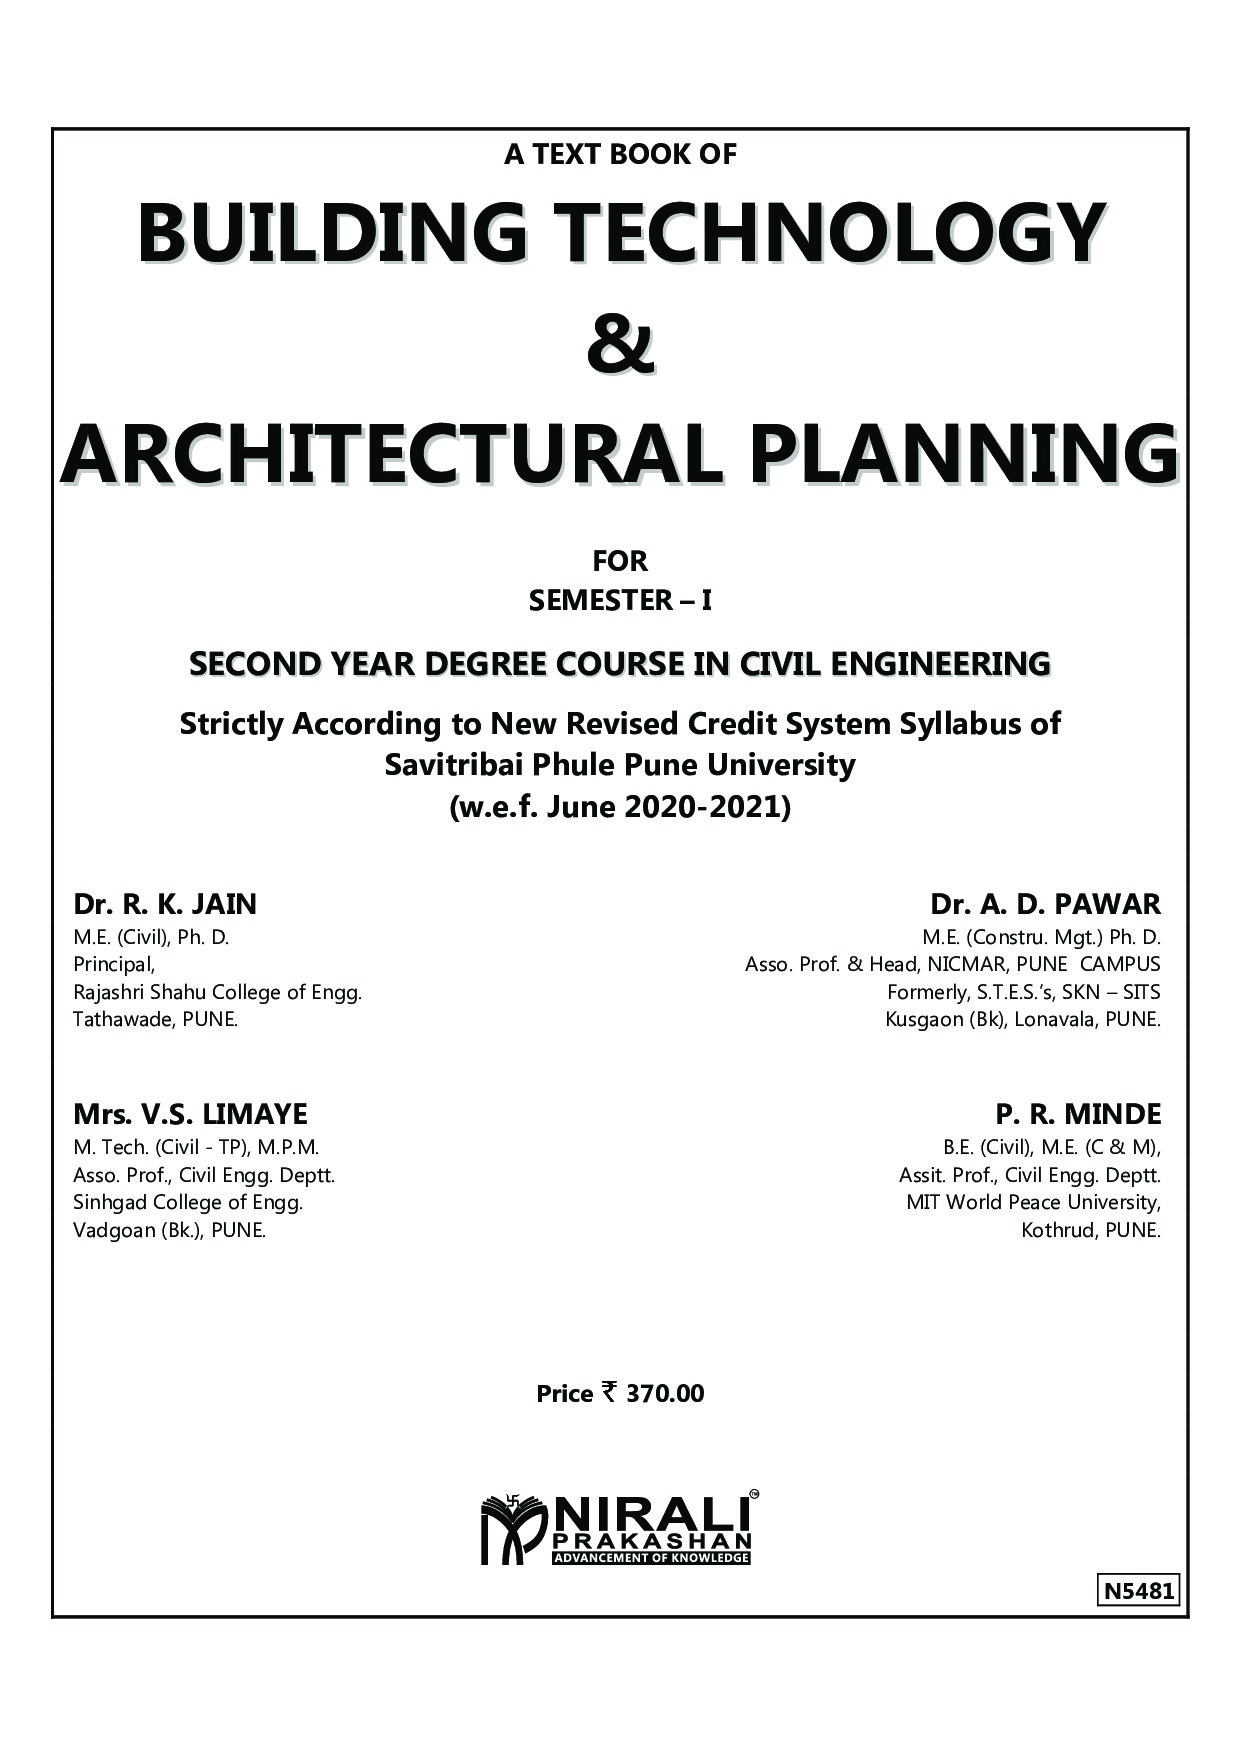 BUILDING TECHNOLOGY AND ARCHITECTURAL PLANNING_ For SPPU - Second Year (SE) Degree Course in Civil Engineering, 2021